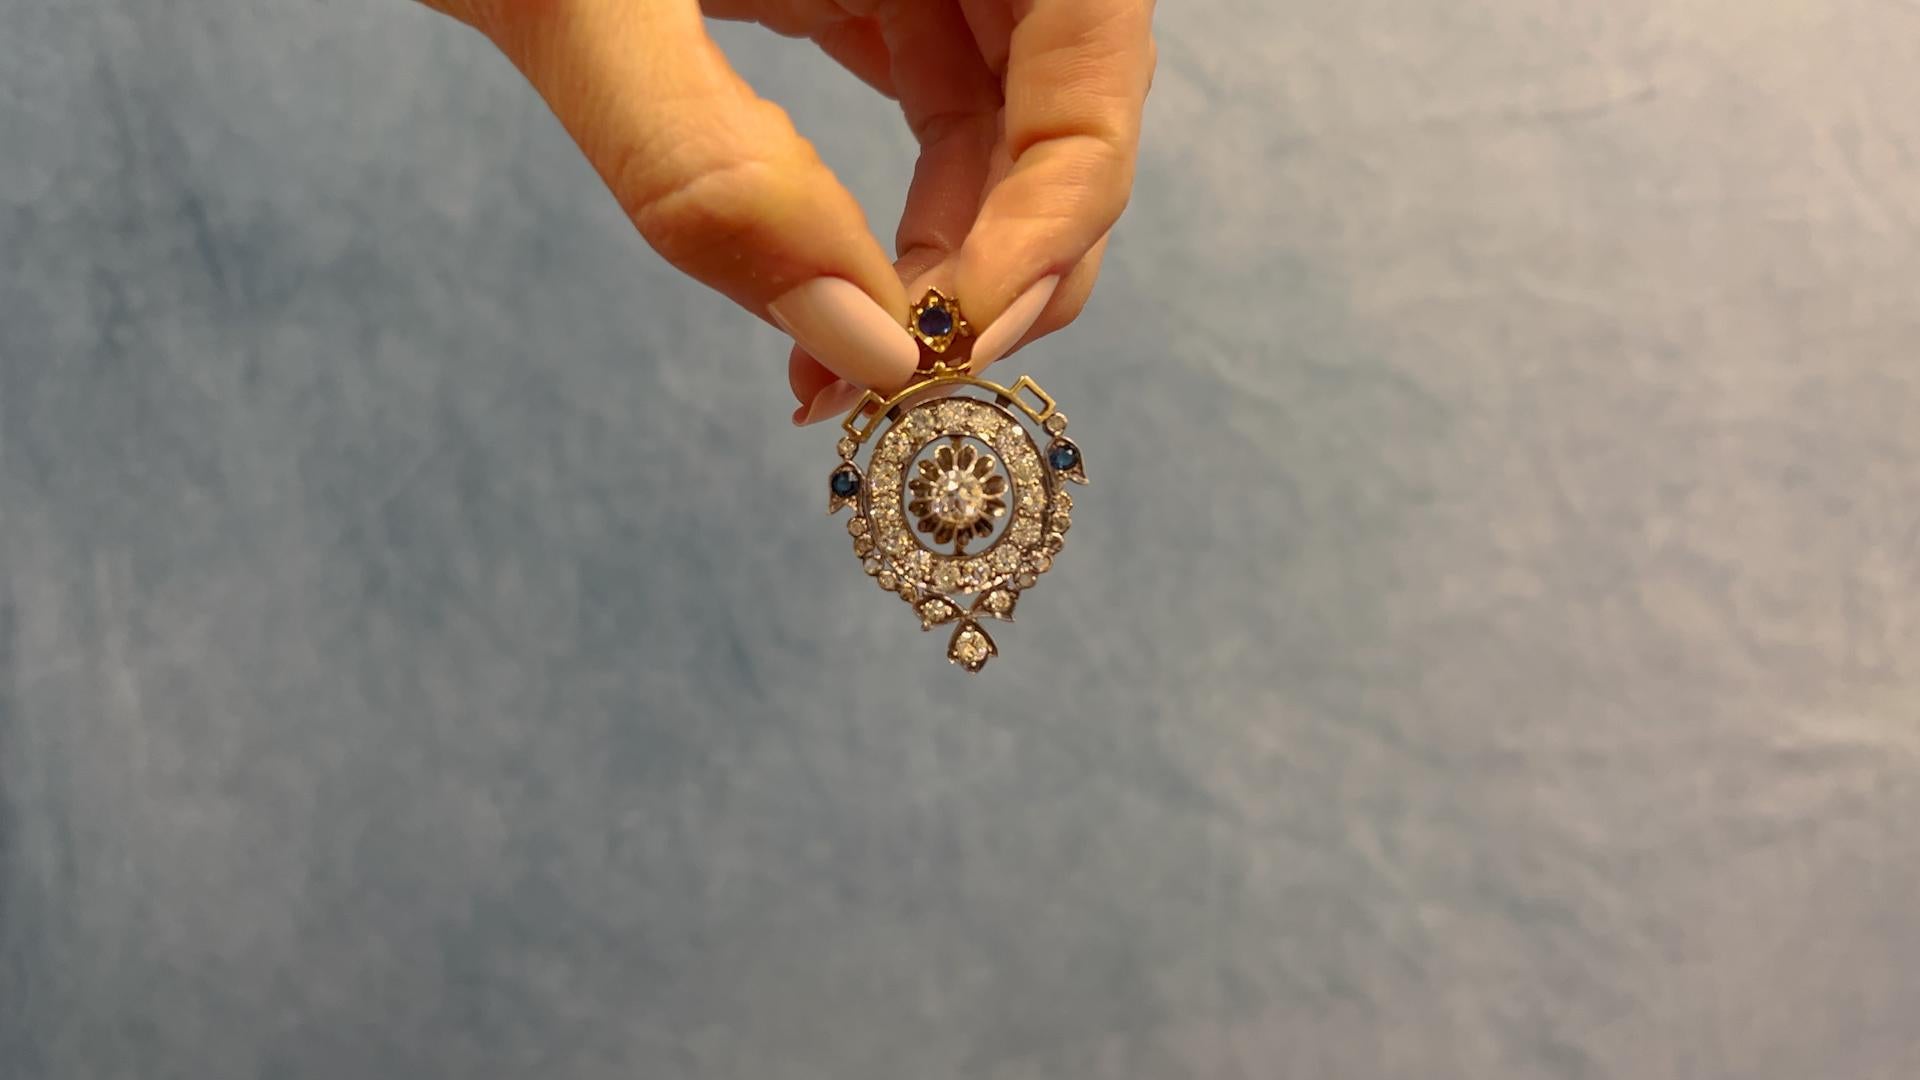 One Victorian Diamond and Sapphire 18k Yellow Gold Silver Pendant. Featuring one old European cut diamond of approximately 0.80 carat, graded H color, SI1 clarity. Accented by 30 old European and senaille cut diamonds with a total weight of